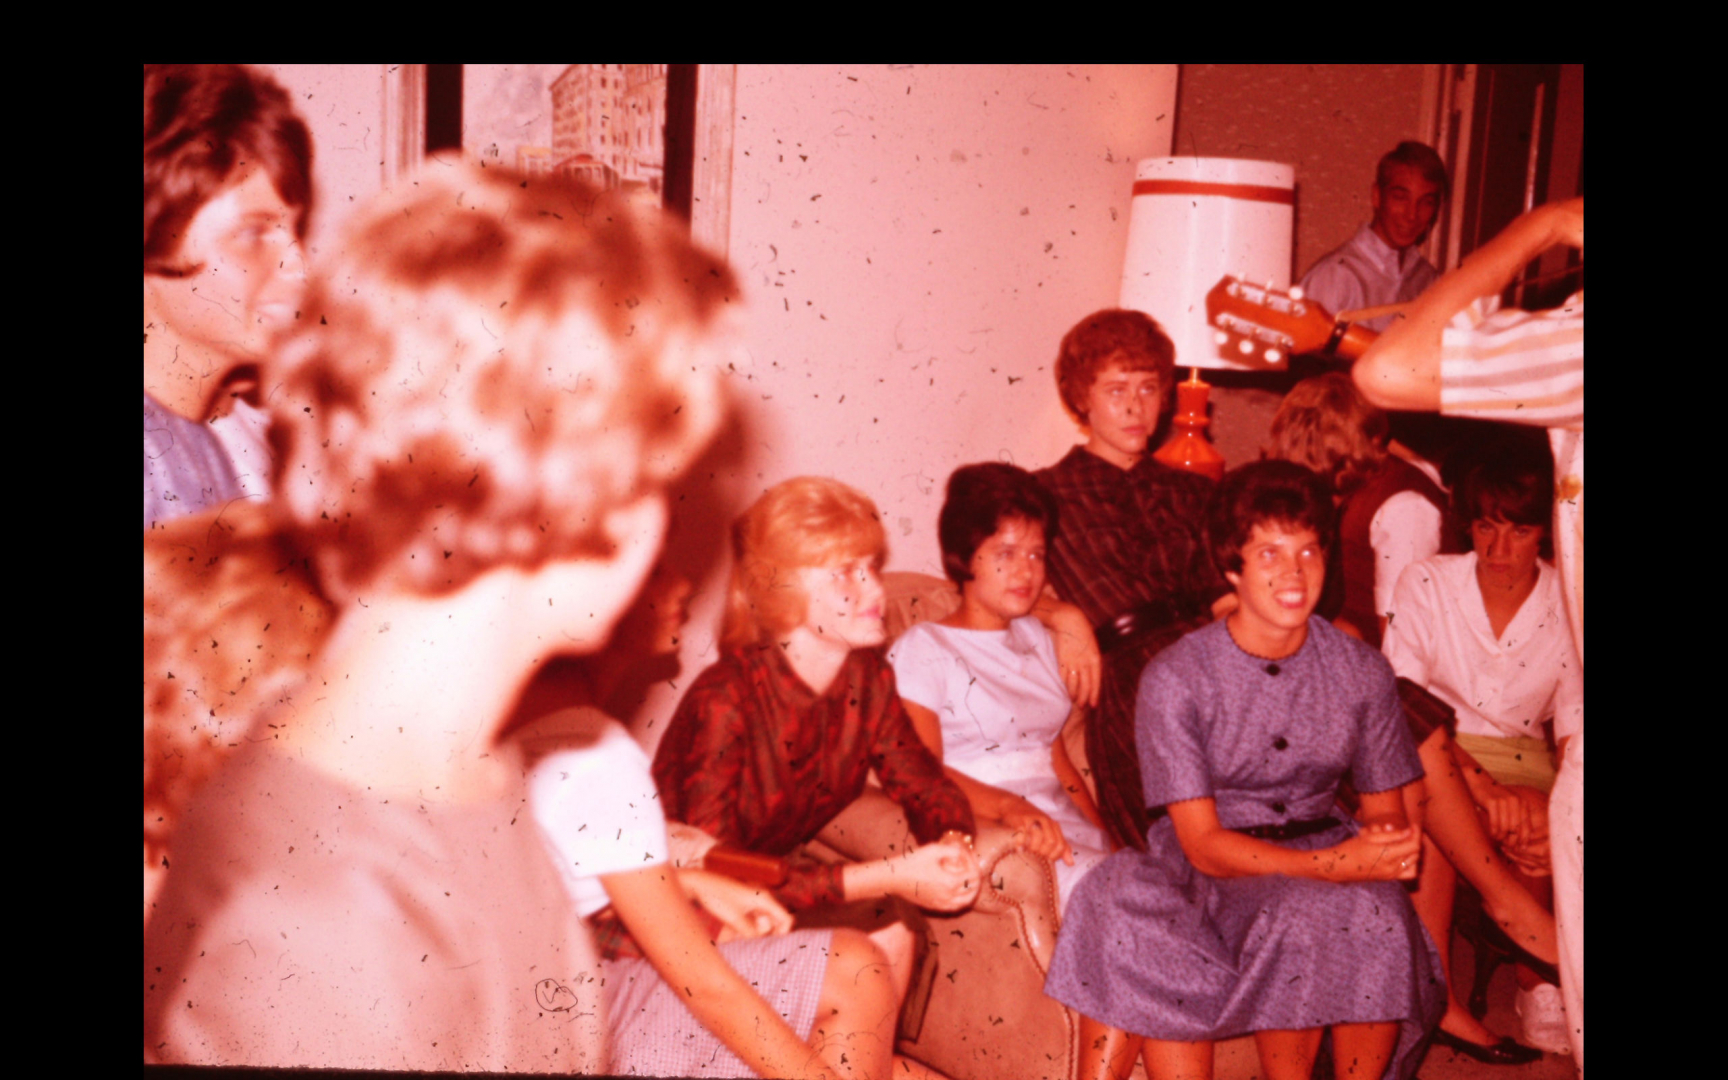 The classmates that I think can be identified are from L to R: Donna Brown, Maria Duarte, Kay Anderson Wieie, Pat Hand.  Janet Shelburne Graves says she is in the picture with Karen Gellette Hanson on the left.